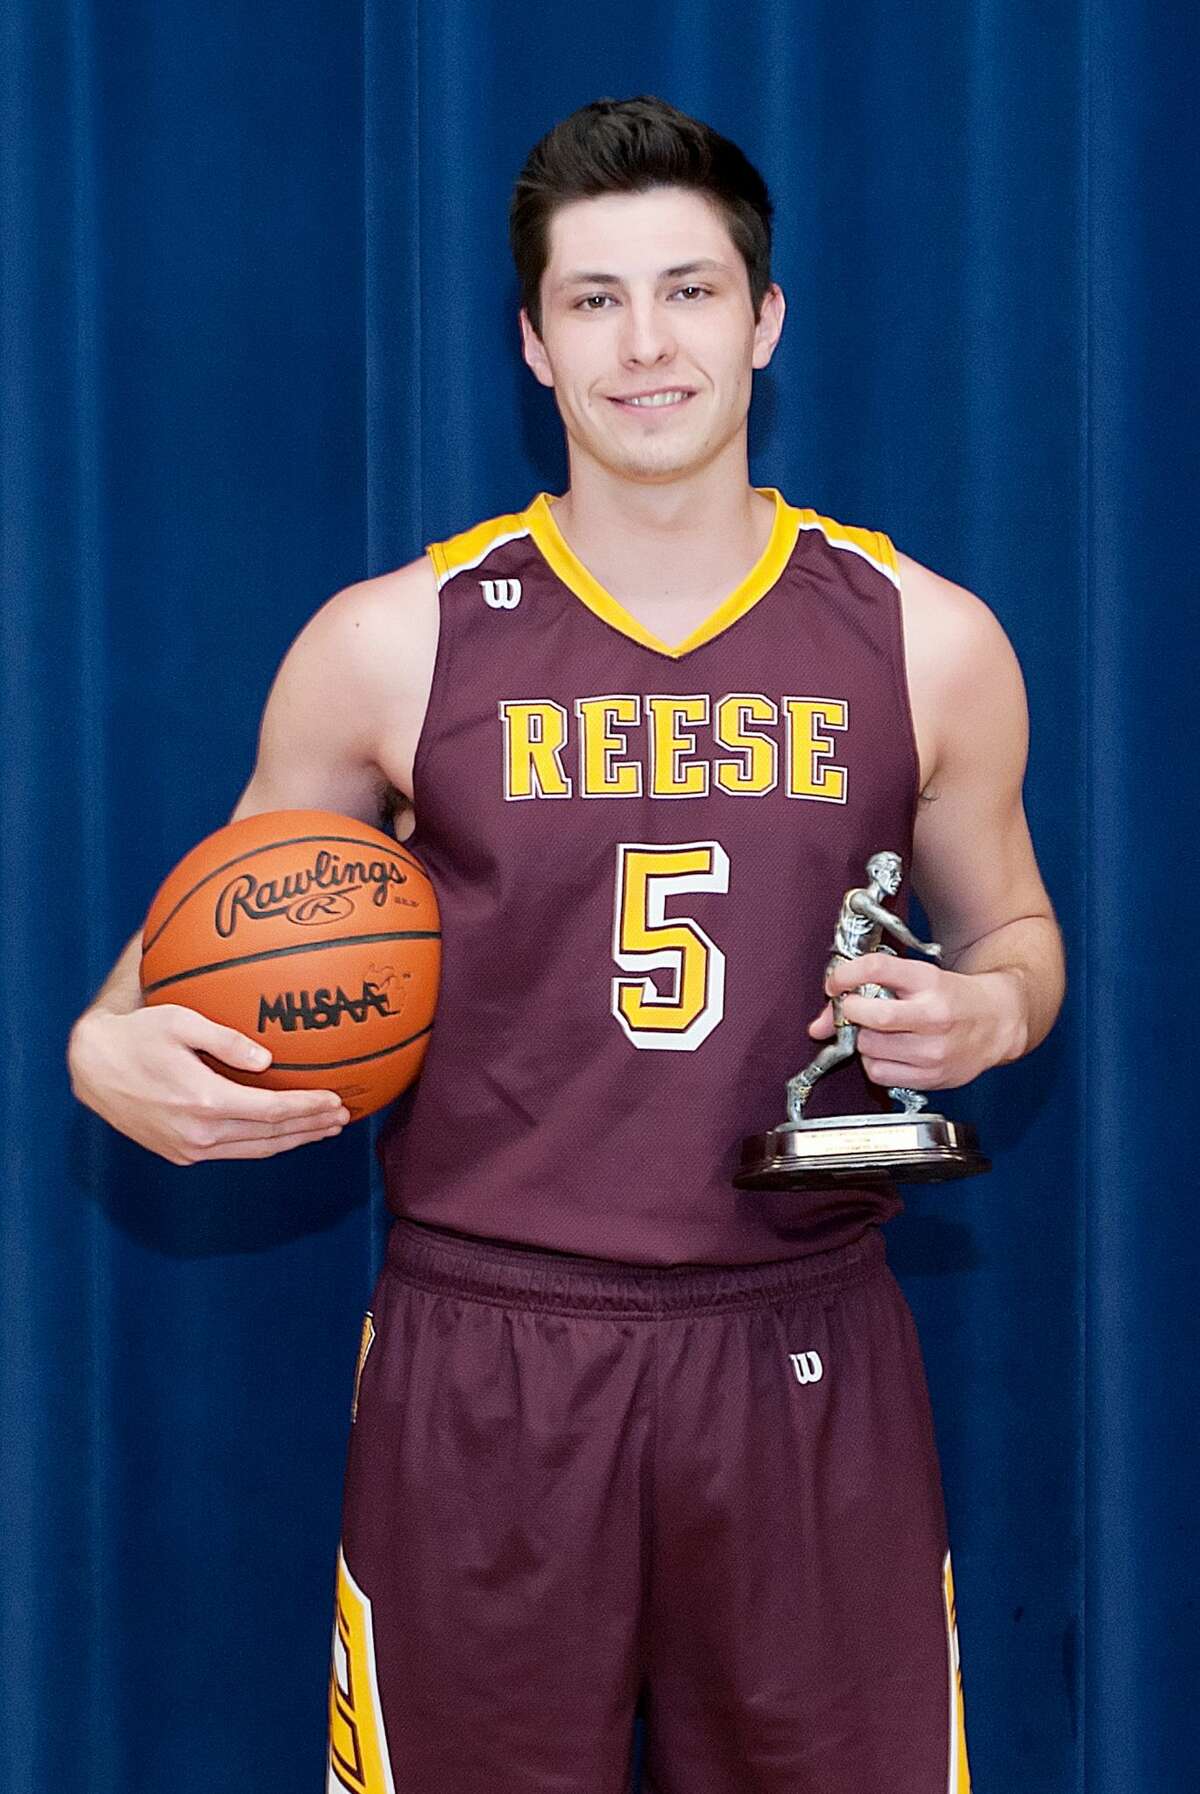 Name: Kyle Stockmeyer (Player of the Year)  Team: Reese Pos: Forward Class: Jr. No. 5 Height: 6-3 PPG: 16.0 Rebounds: 6.0 Steals: 1.15 Assists: 2.0